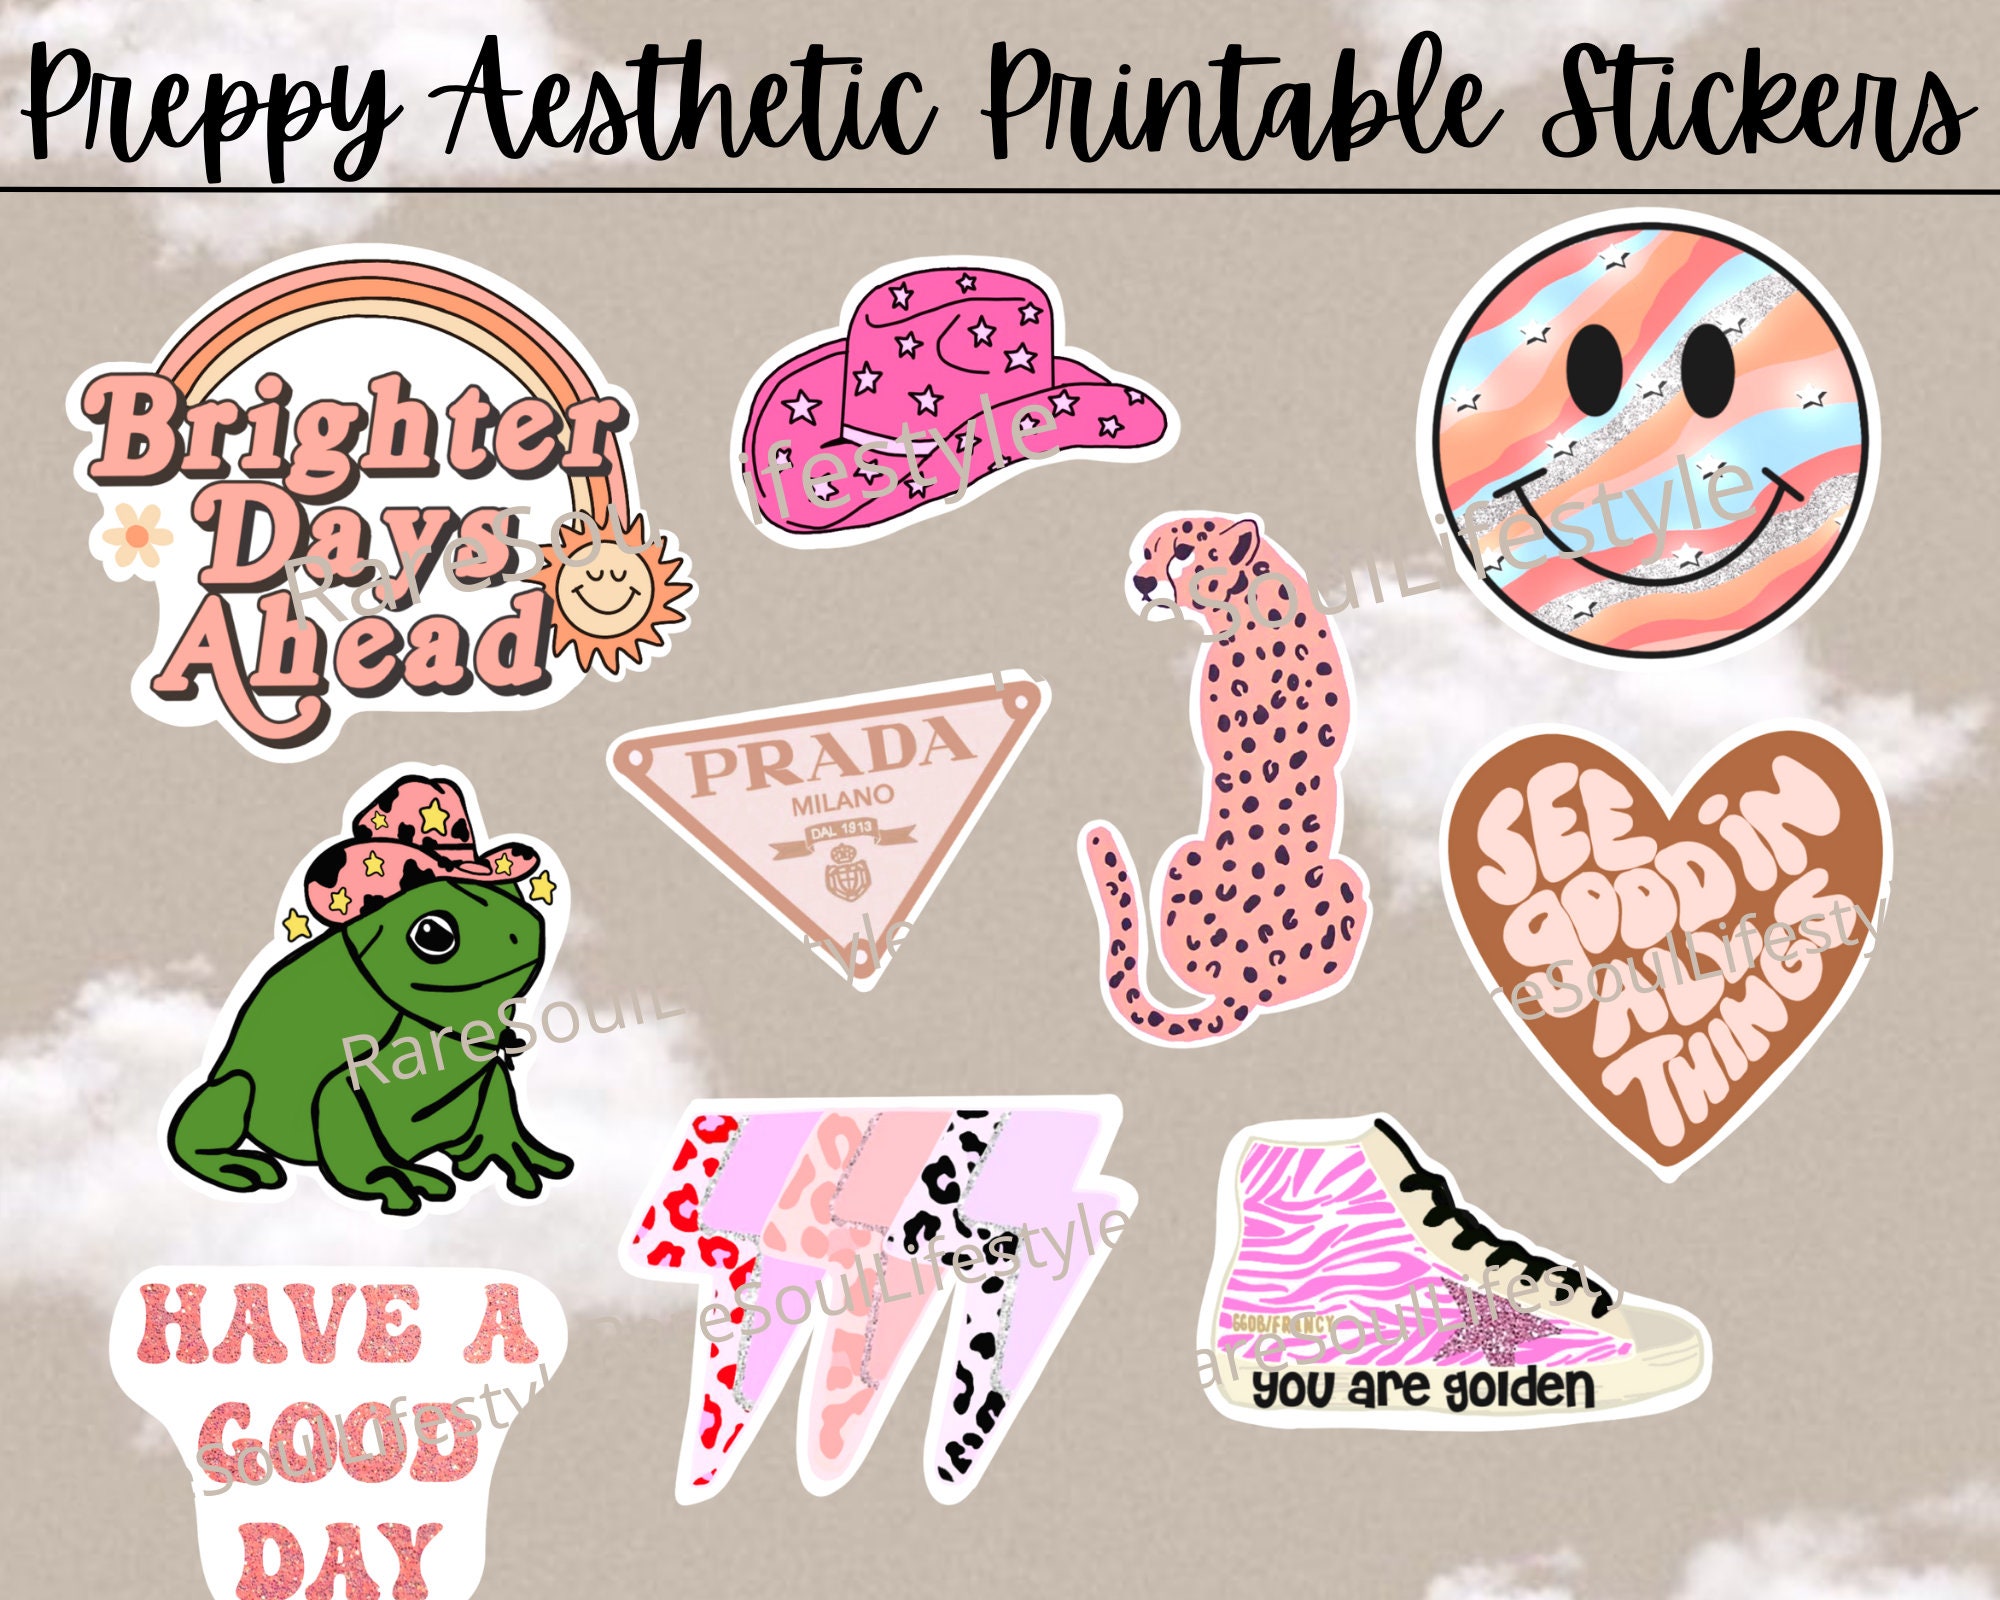 Candy Stickers for Sale  Preppy stickers, Bubble stickers, Tumblr